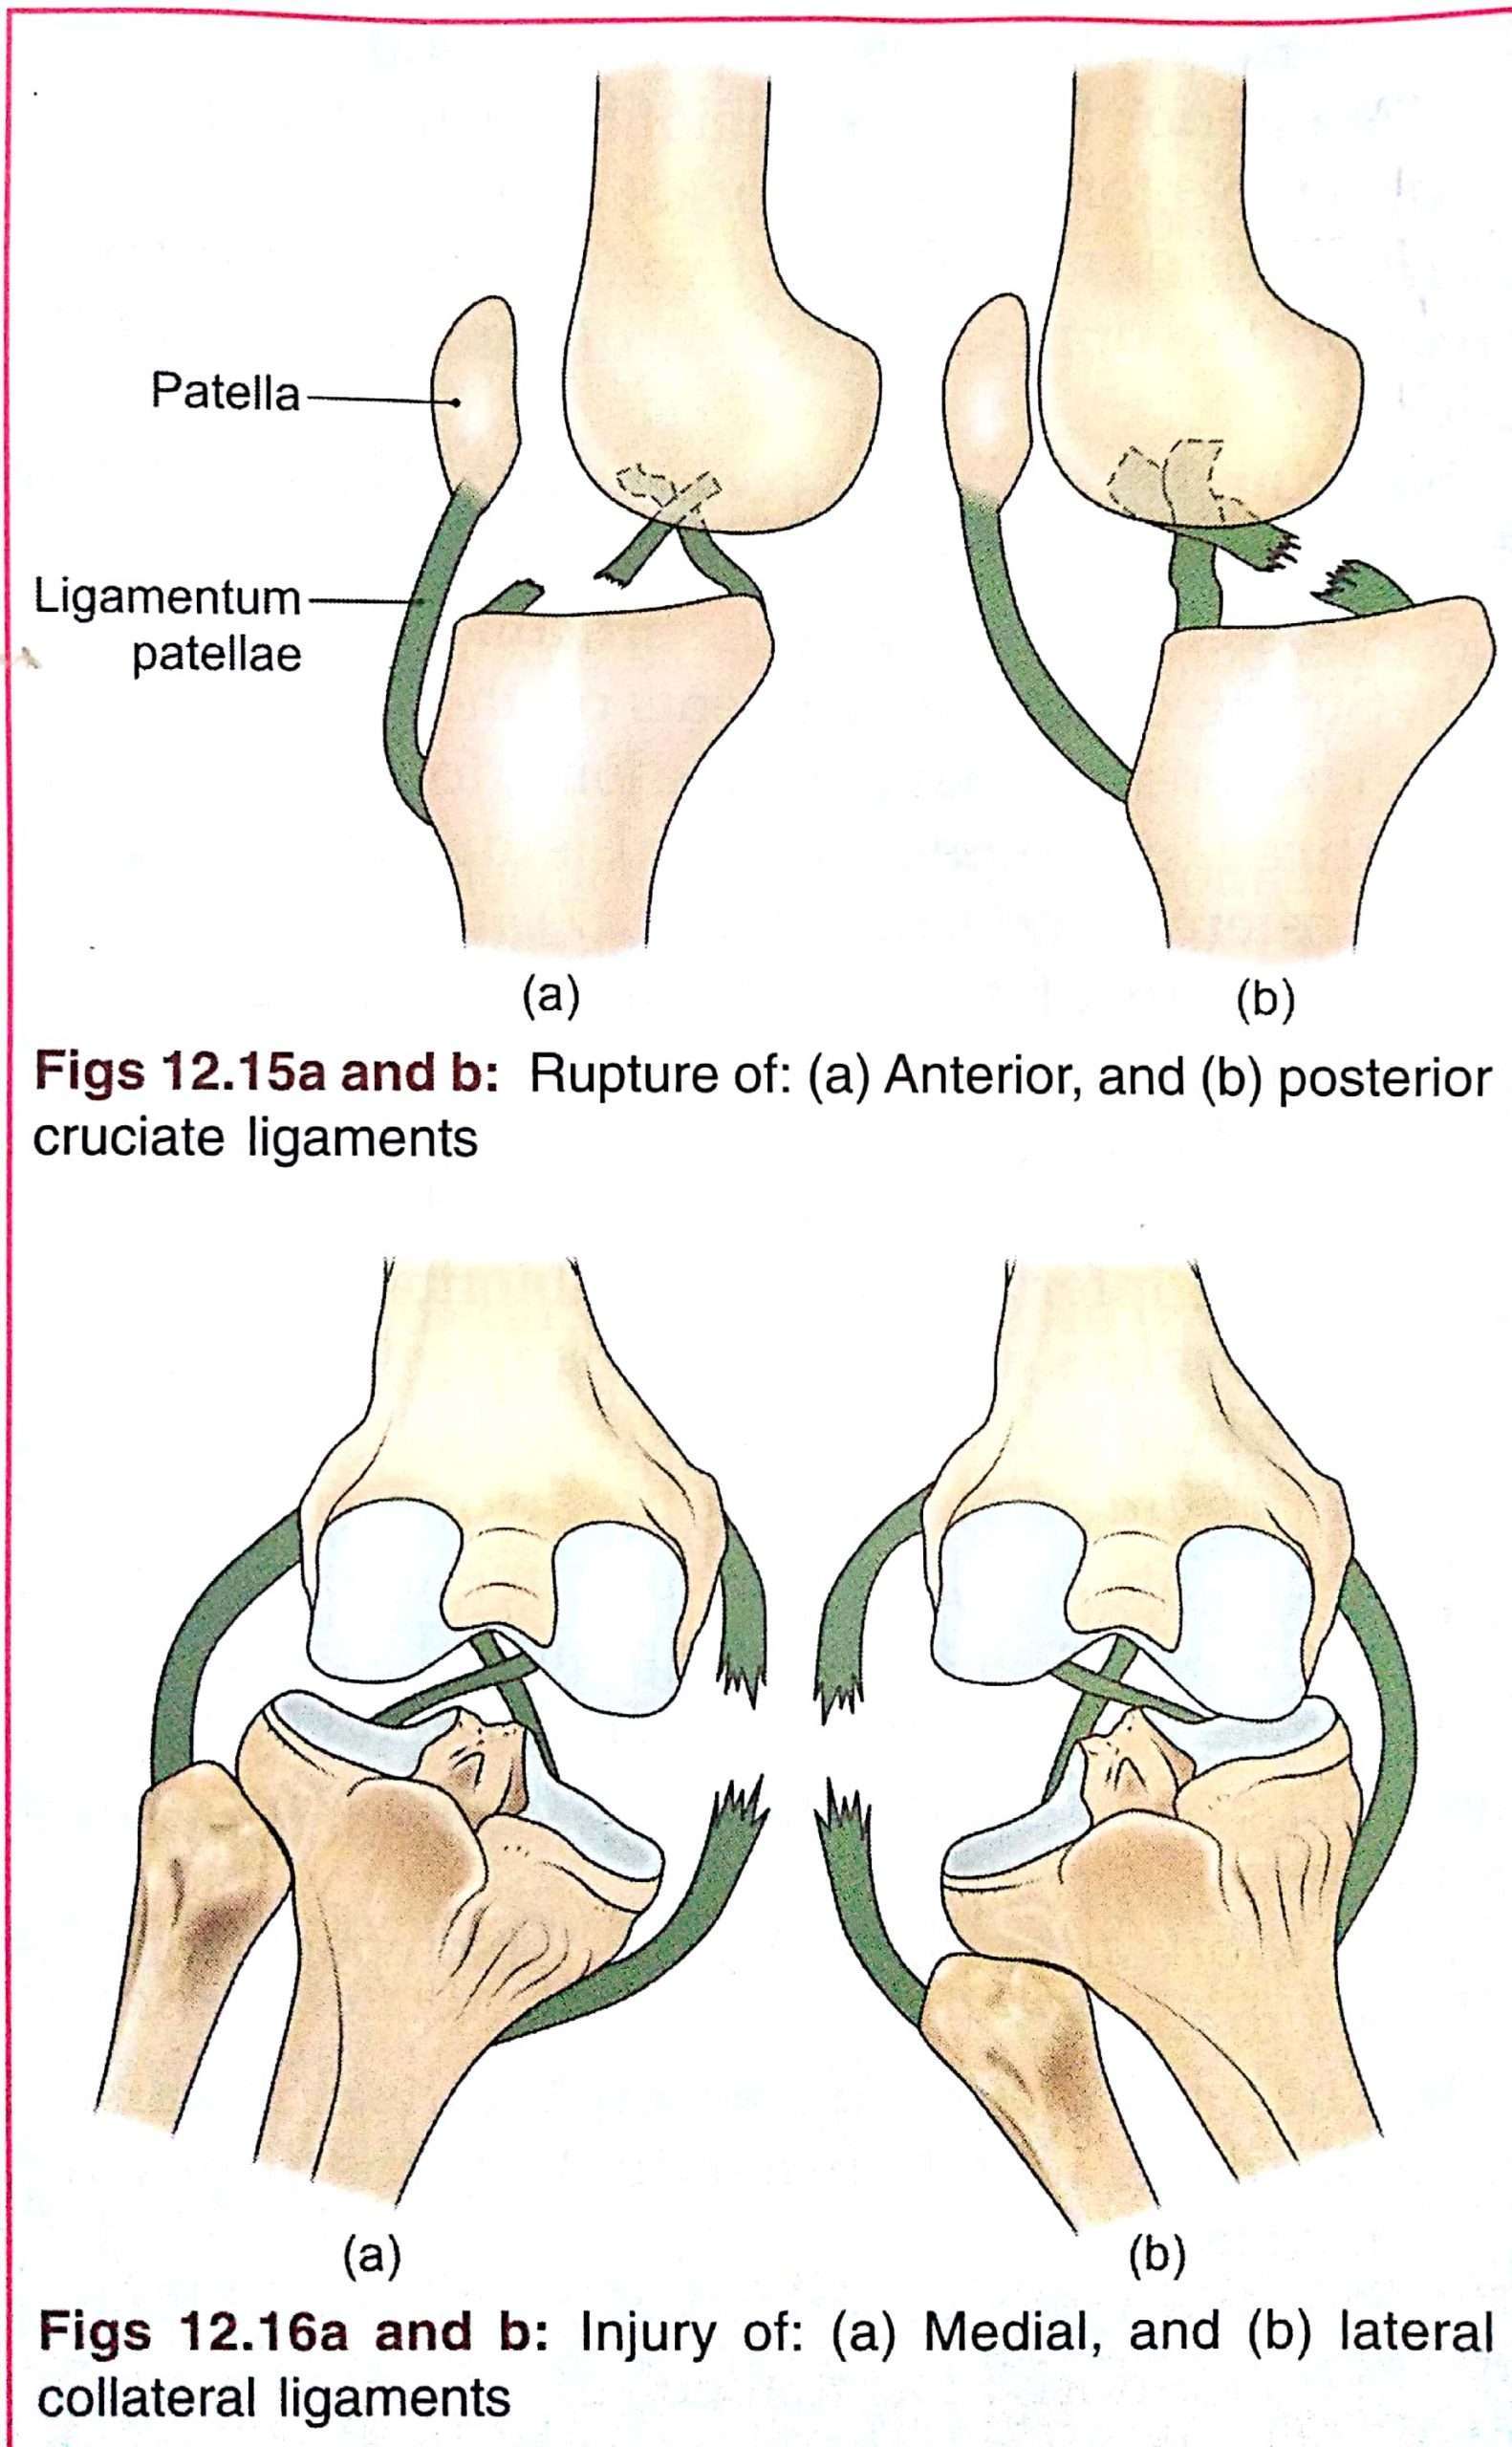 Knee Joint